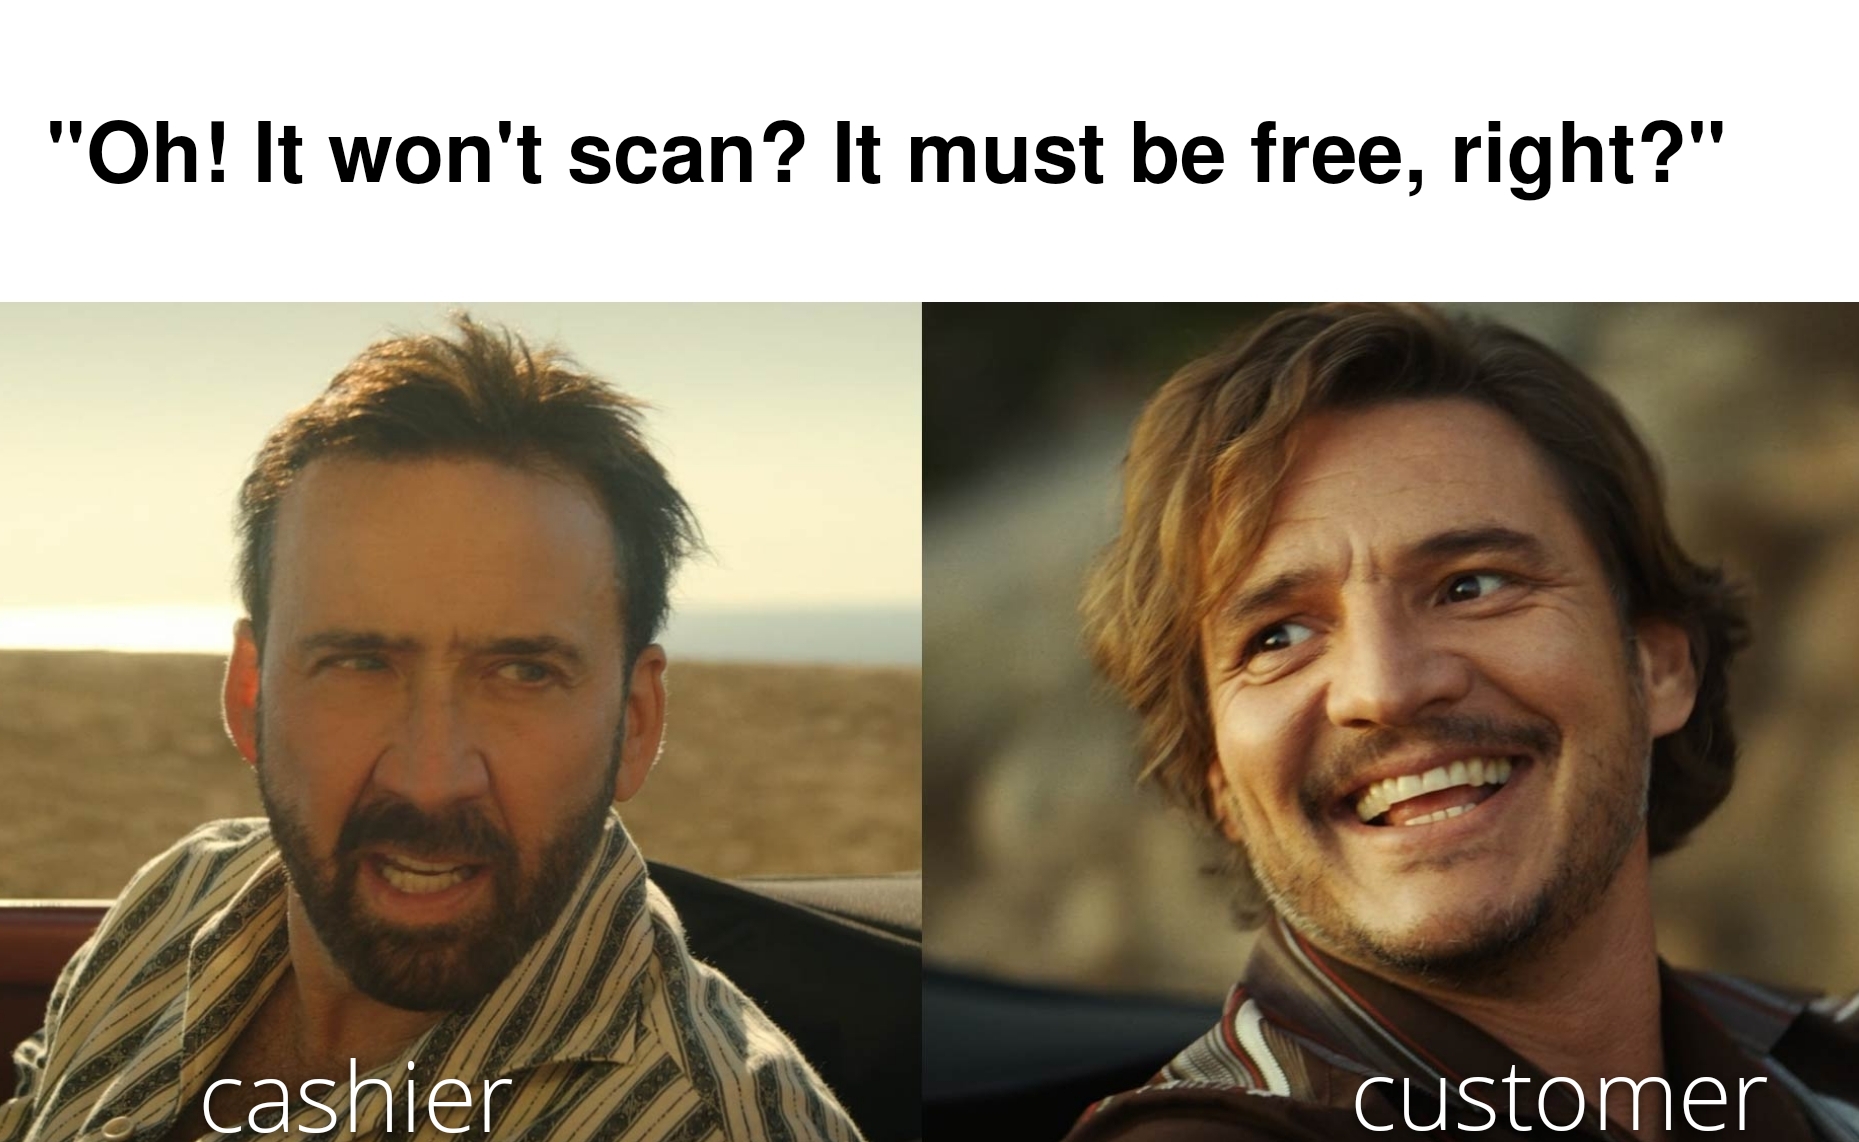 funny memes - photo caption - "Oh! It won't scan? It must be free, right?" cashier Armas customer